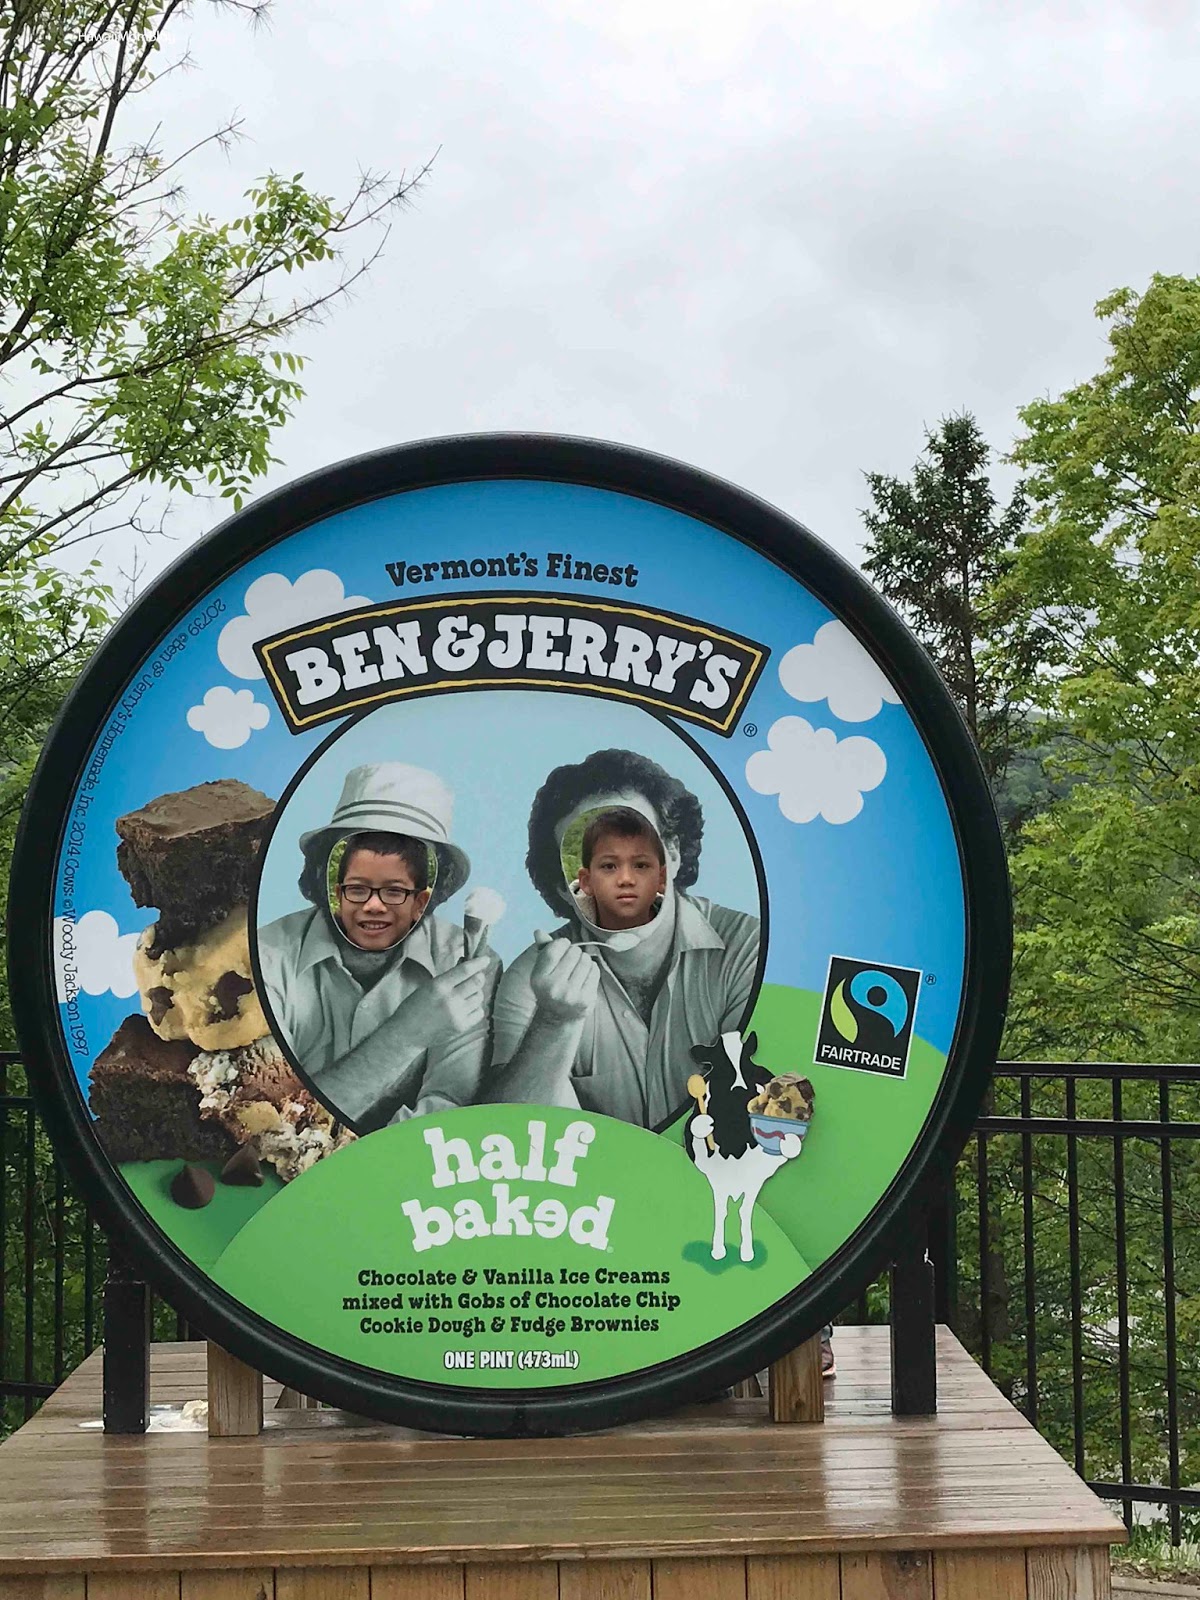 ben and jerry's tour review